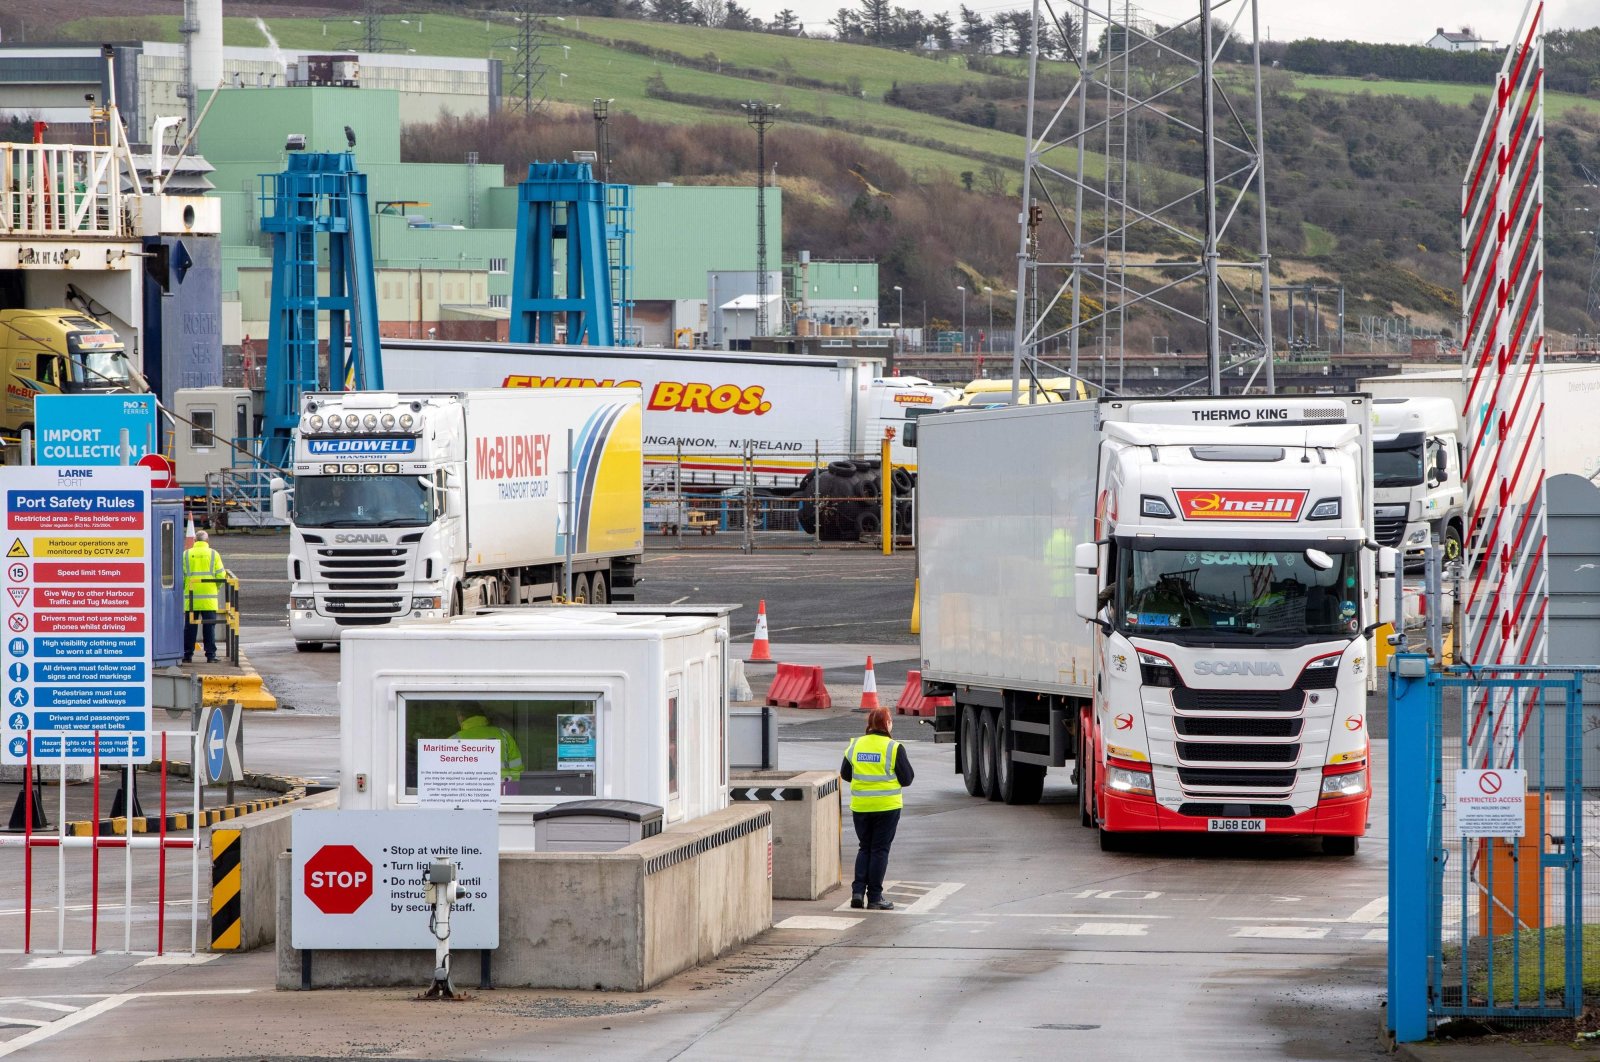 A lorry leaves Larne port, north of Belfast in Northern Ireland, after arriving on a ferry from Stranraer in Scotland, Feb. 3, 2022. (AFP Photo)